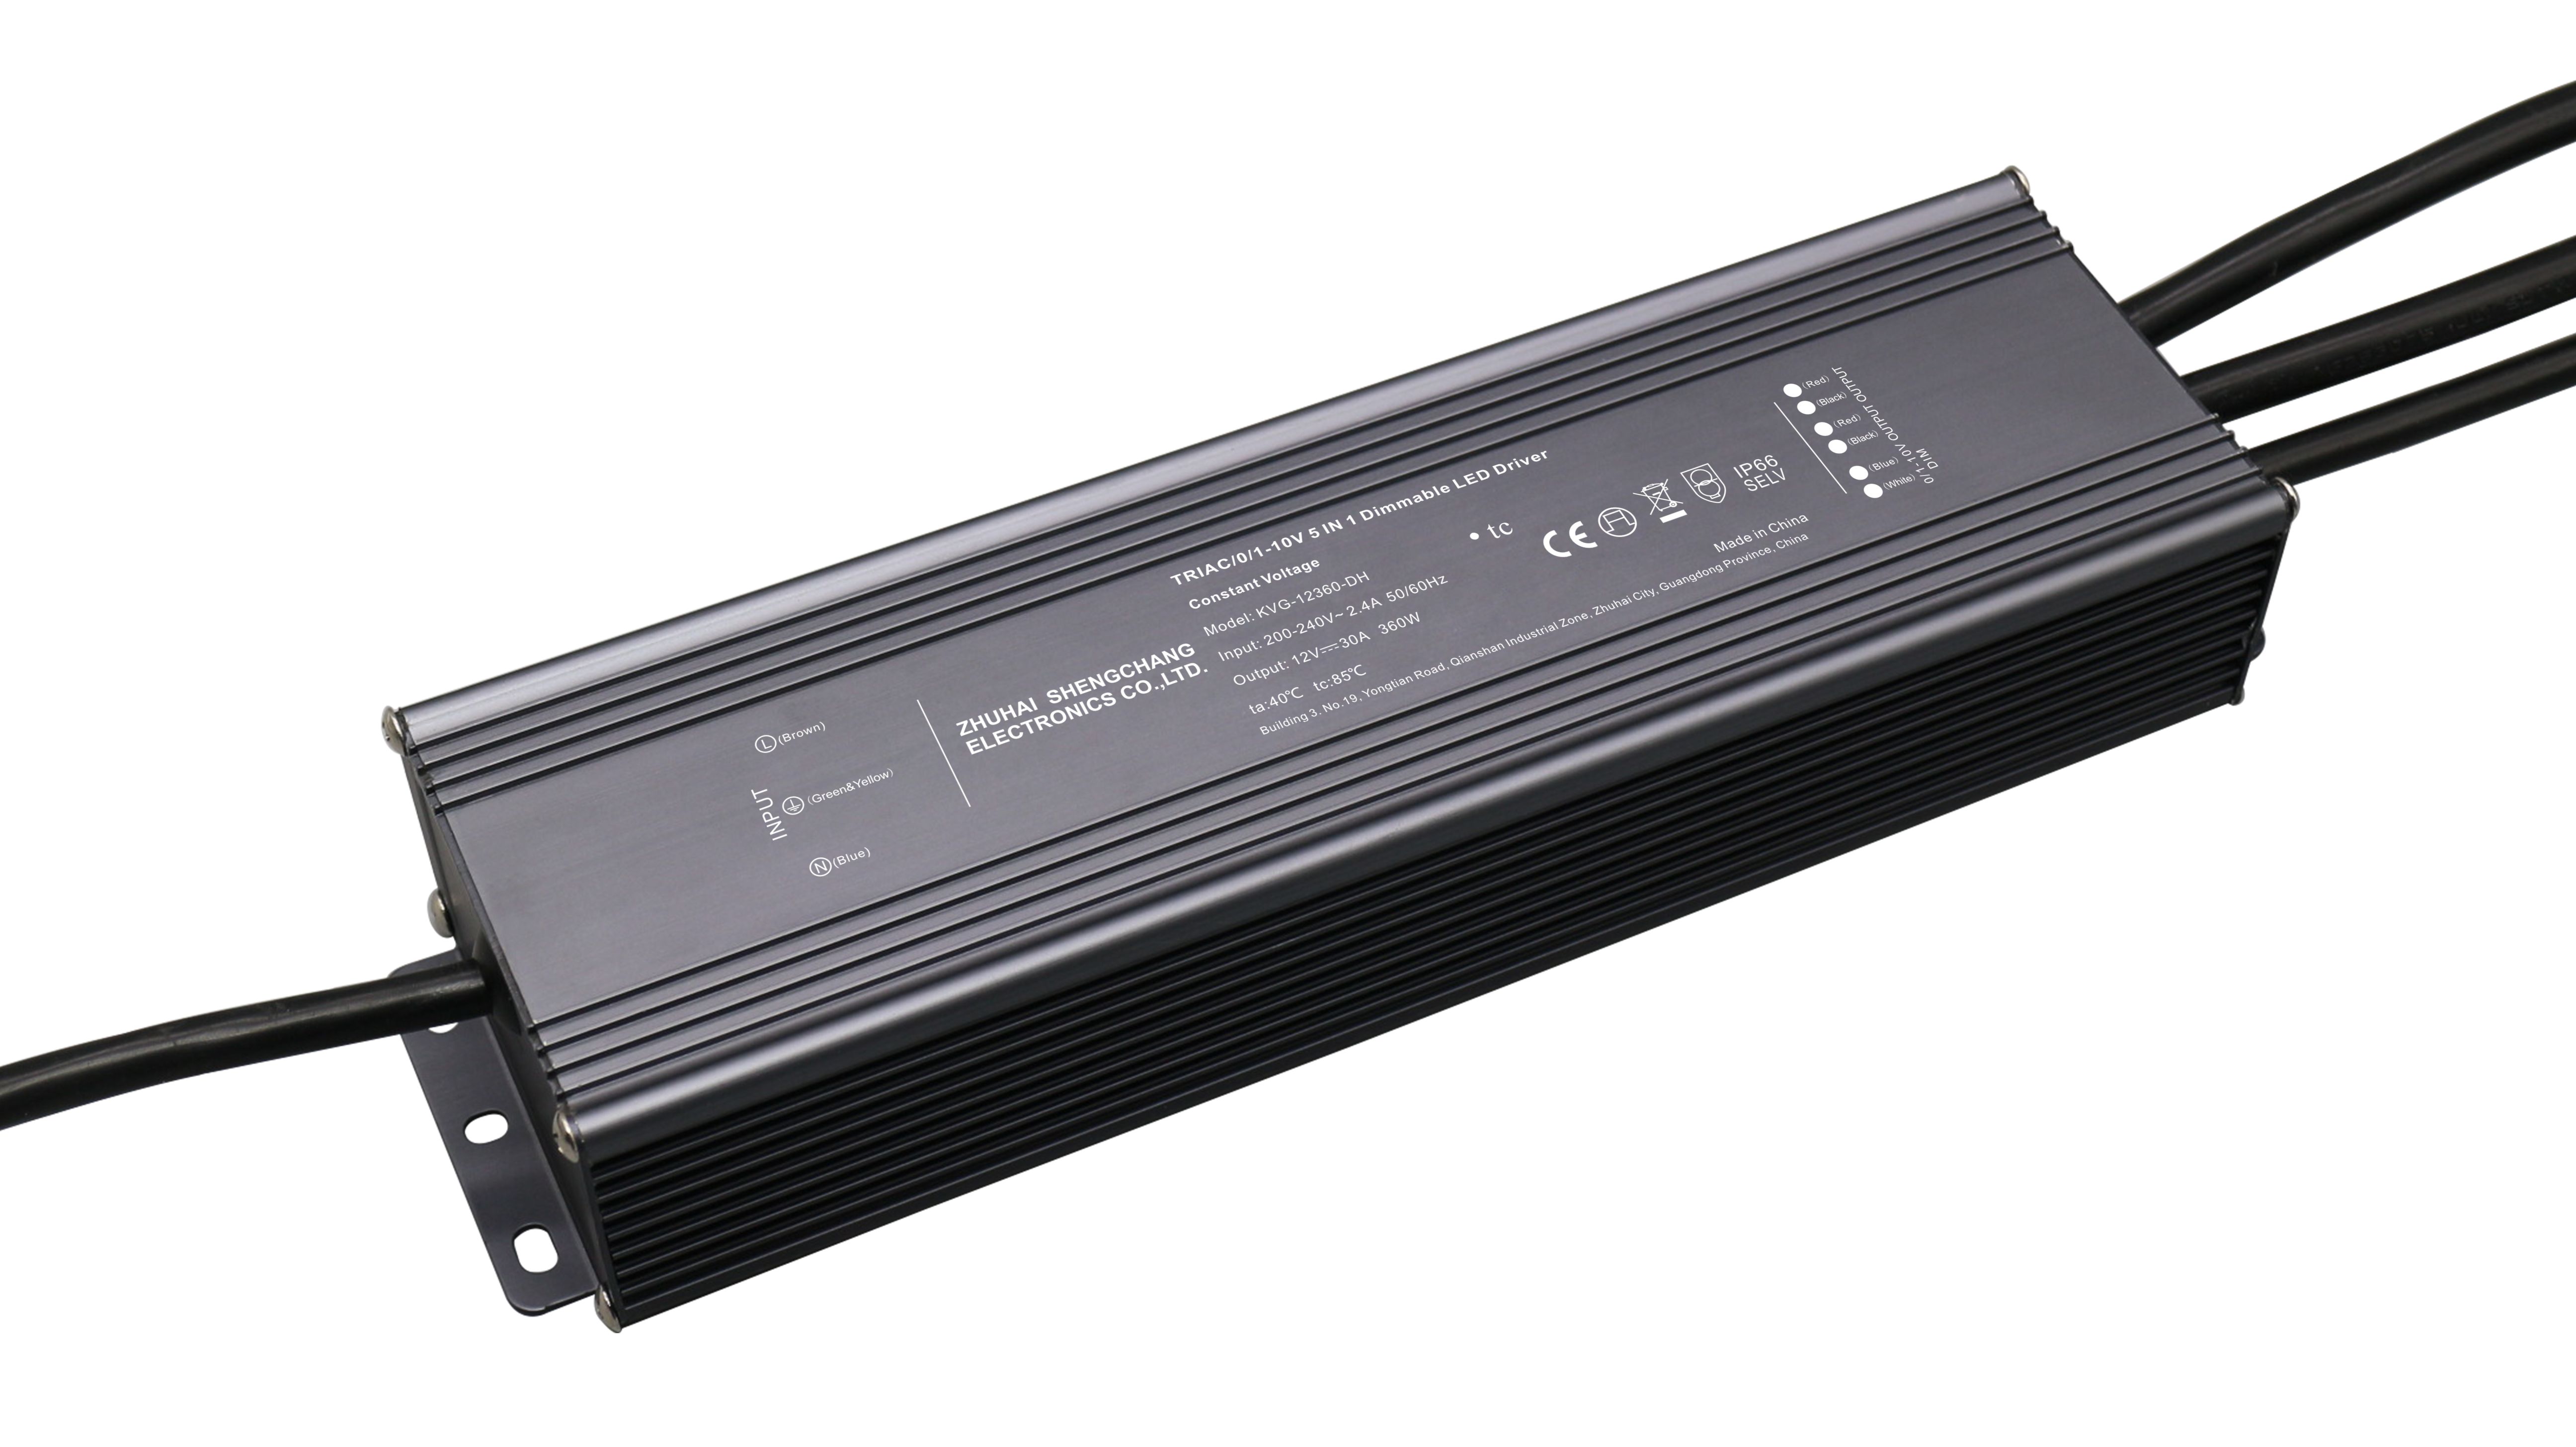 KVG-DH Series 360W Constant Voltage Triac&0/1-10V Dimmable LED driver